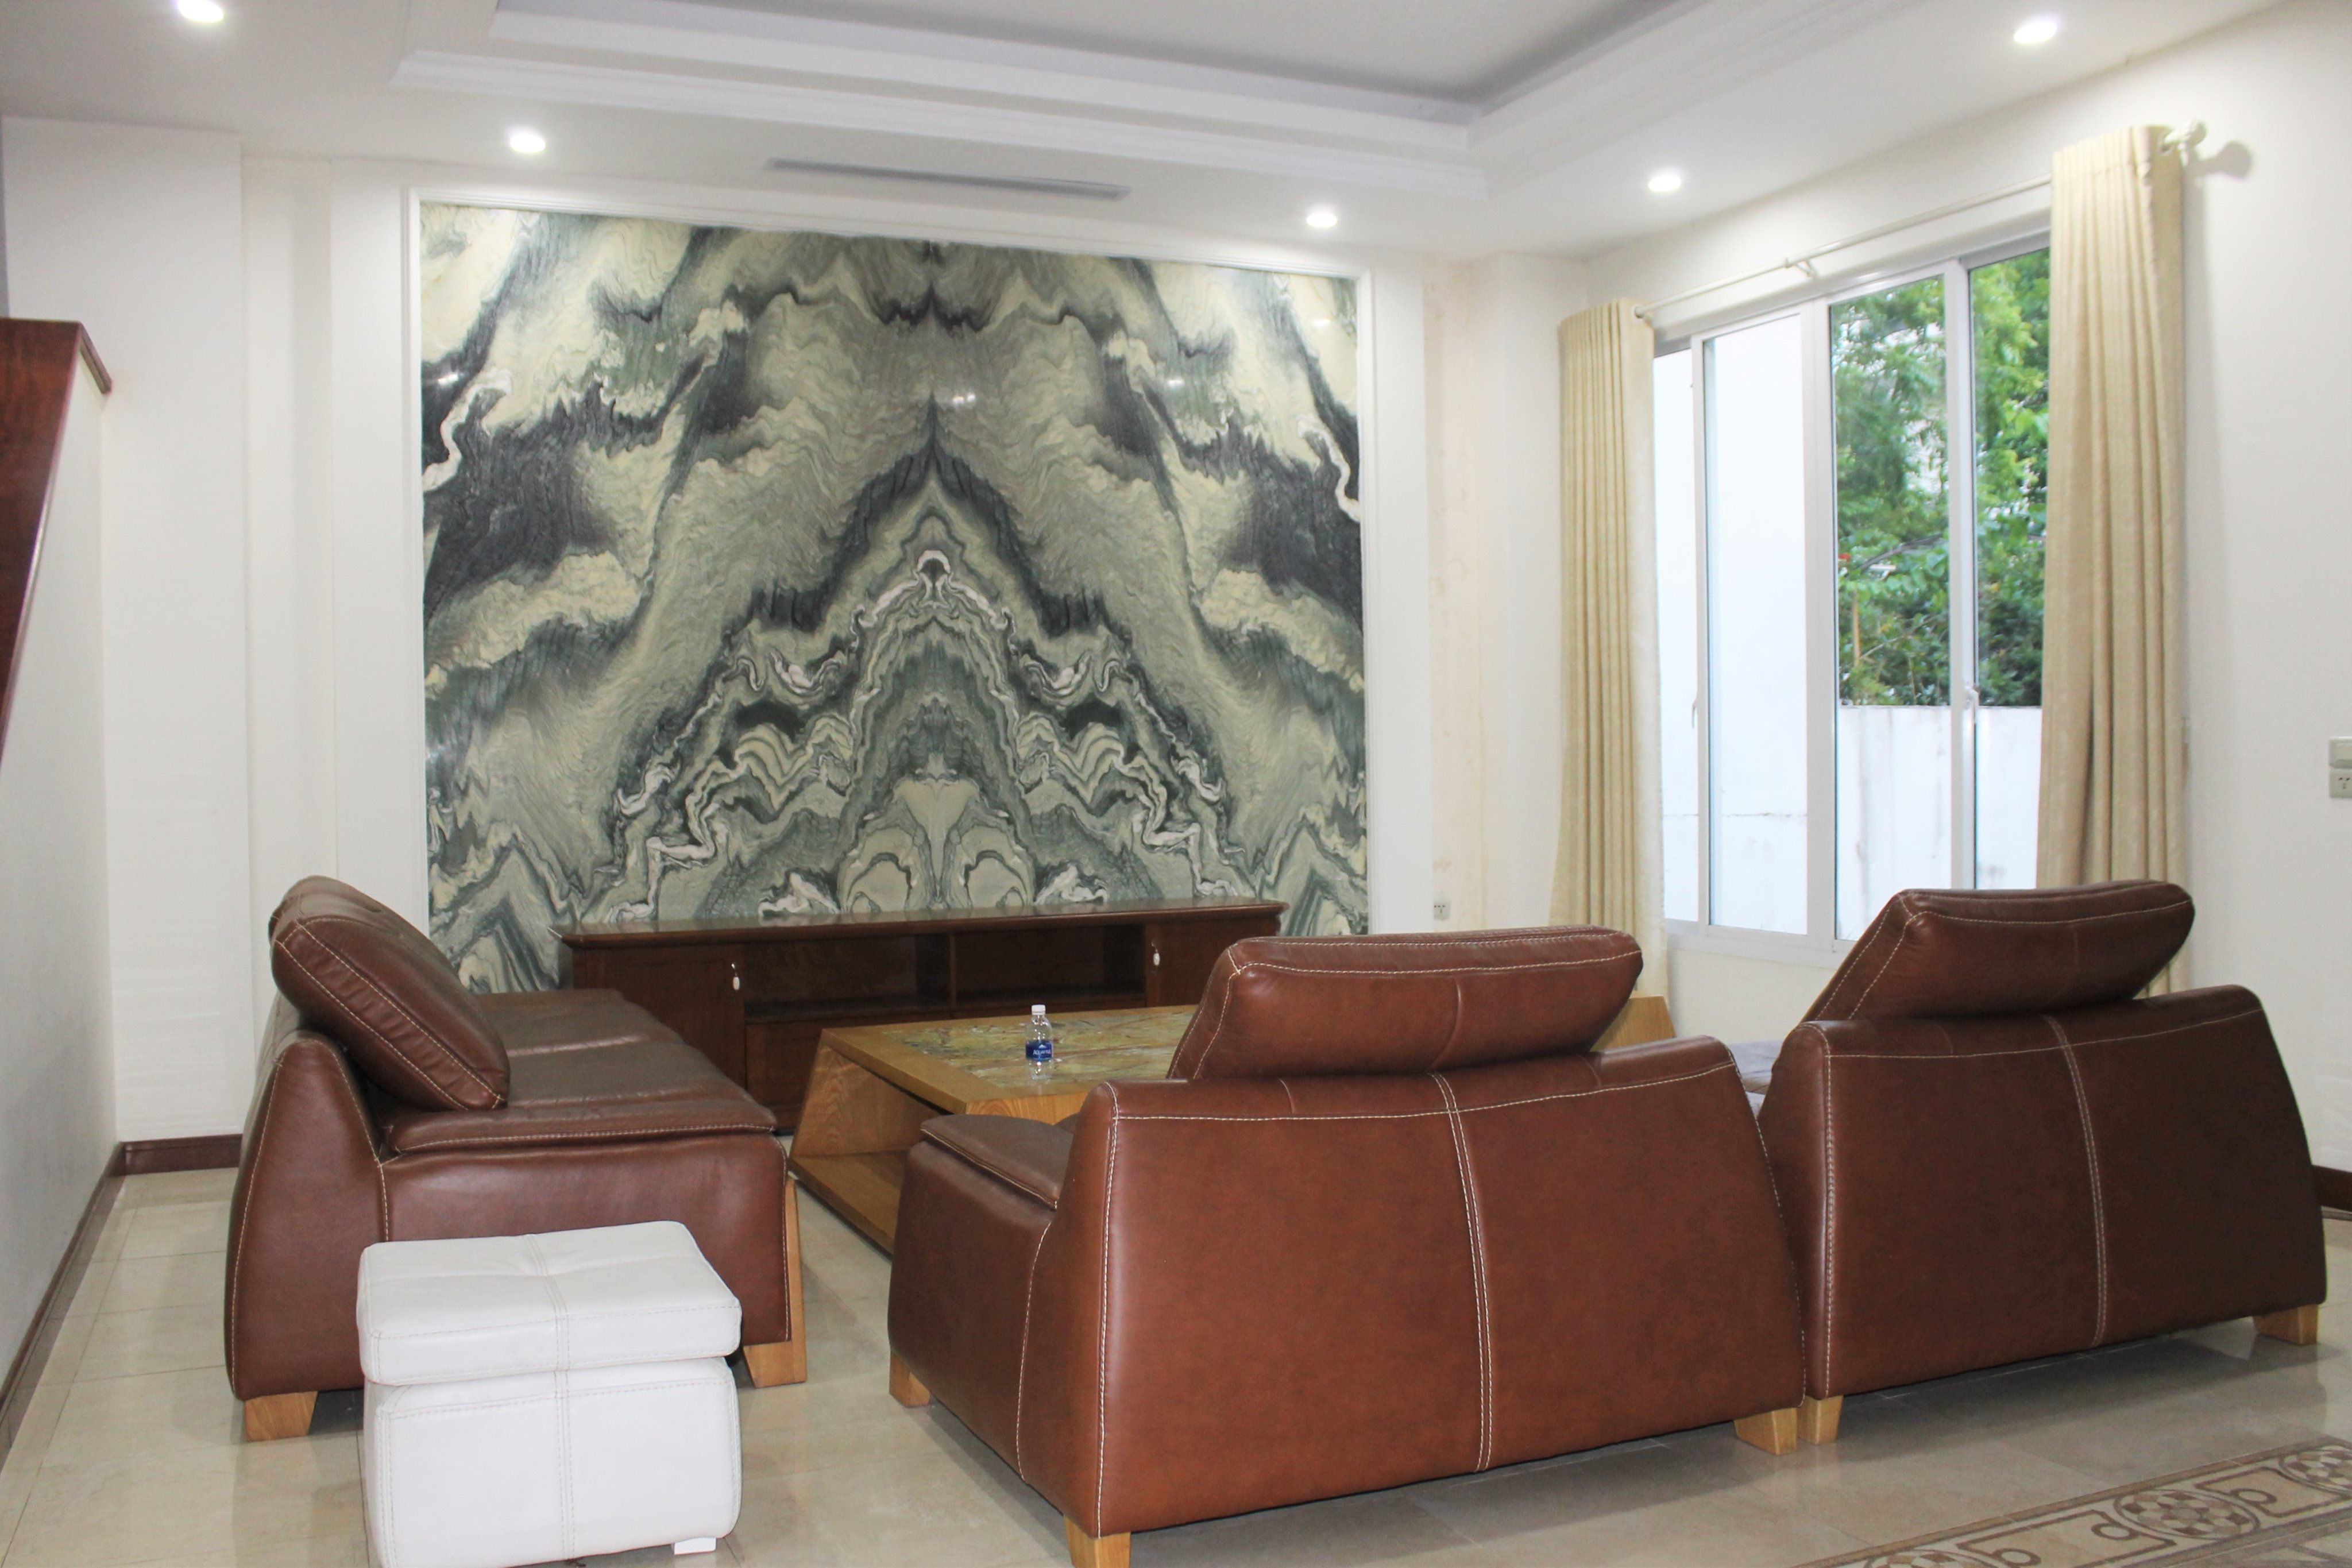 Furnished 3 Bedrooms Duplex Villa To Lease In Vinhomes Riverside in Anh Dao